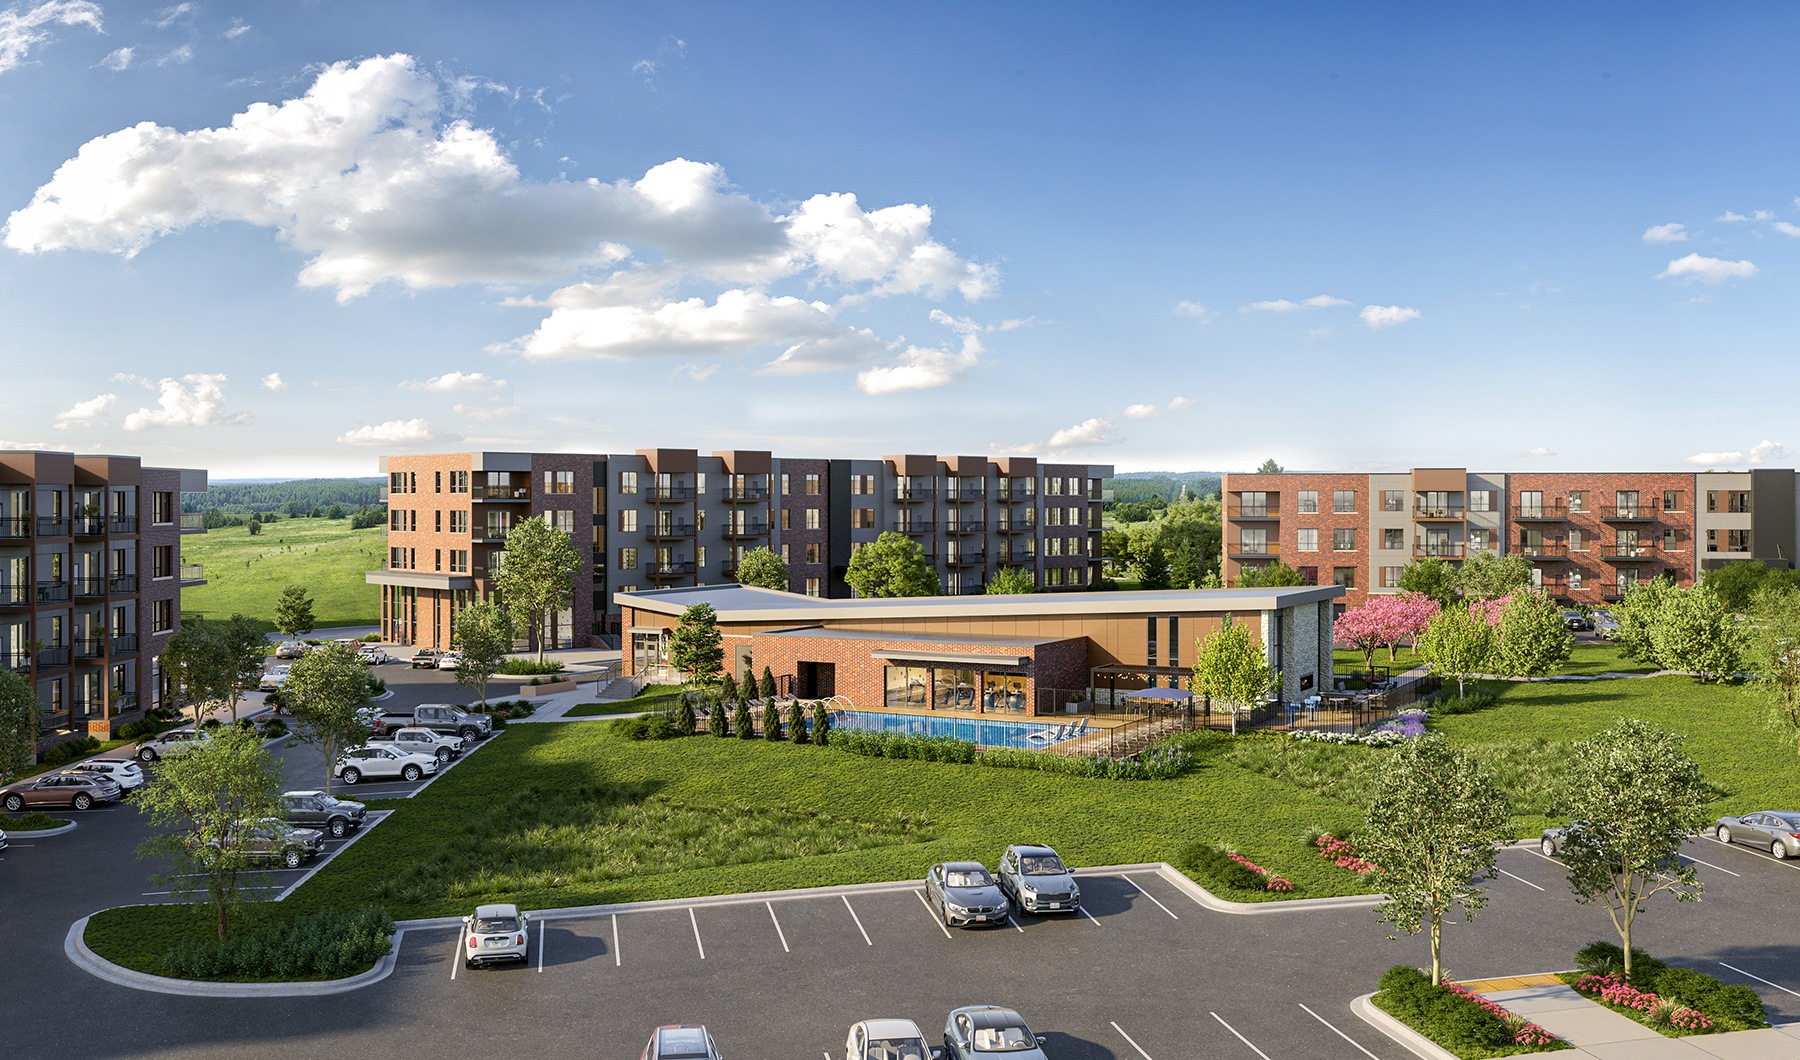 wide view of rendering of building showing lush landscaping and ample parking